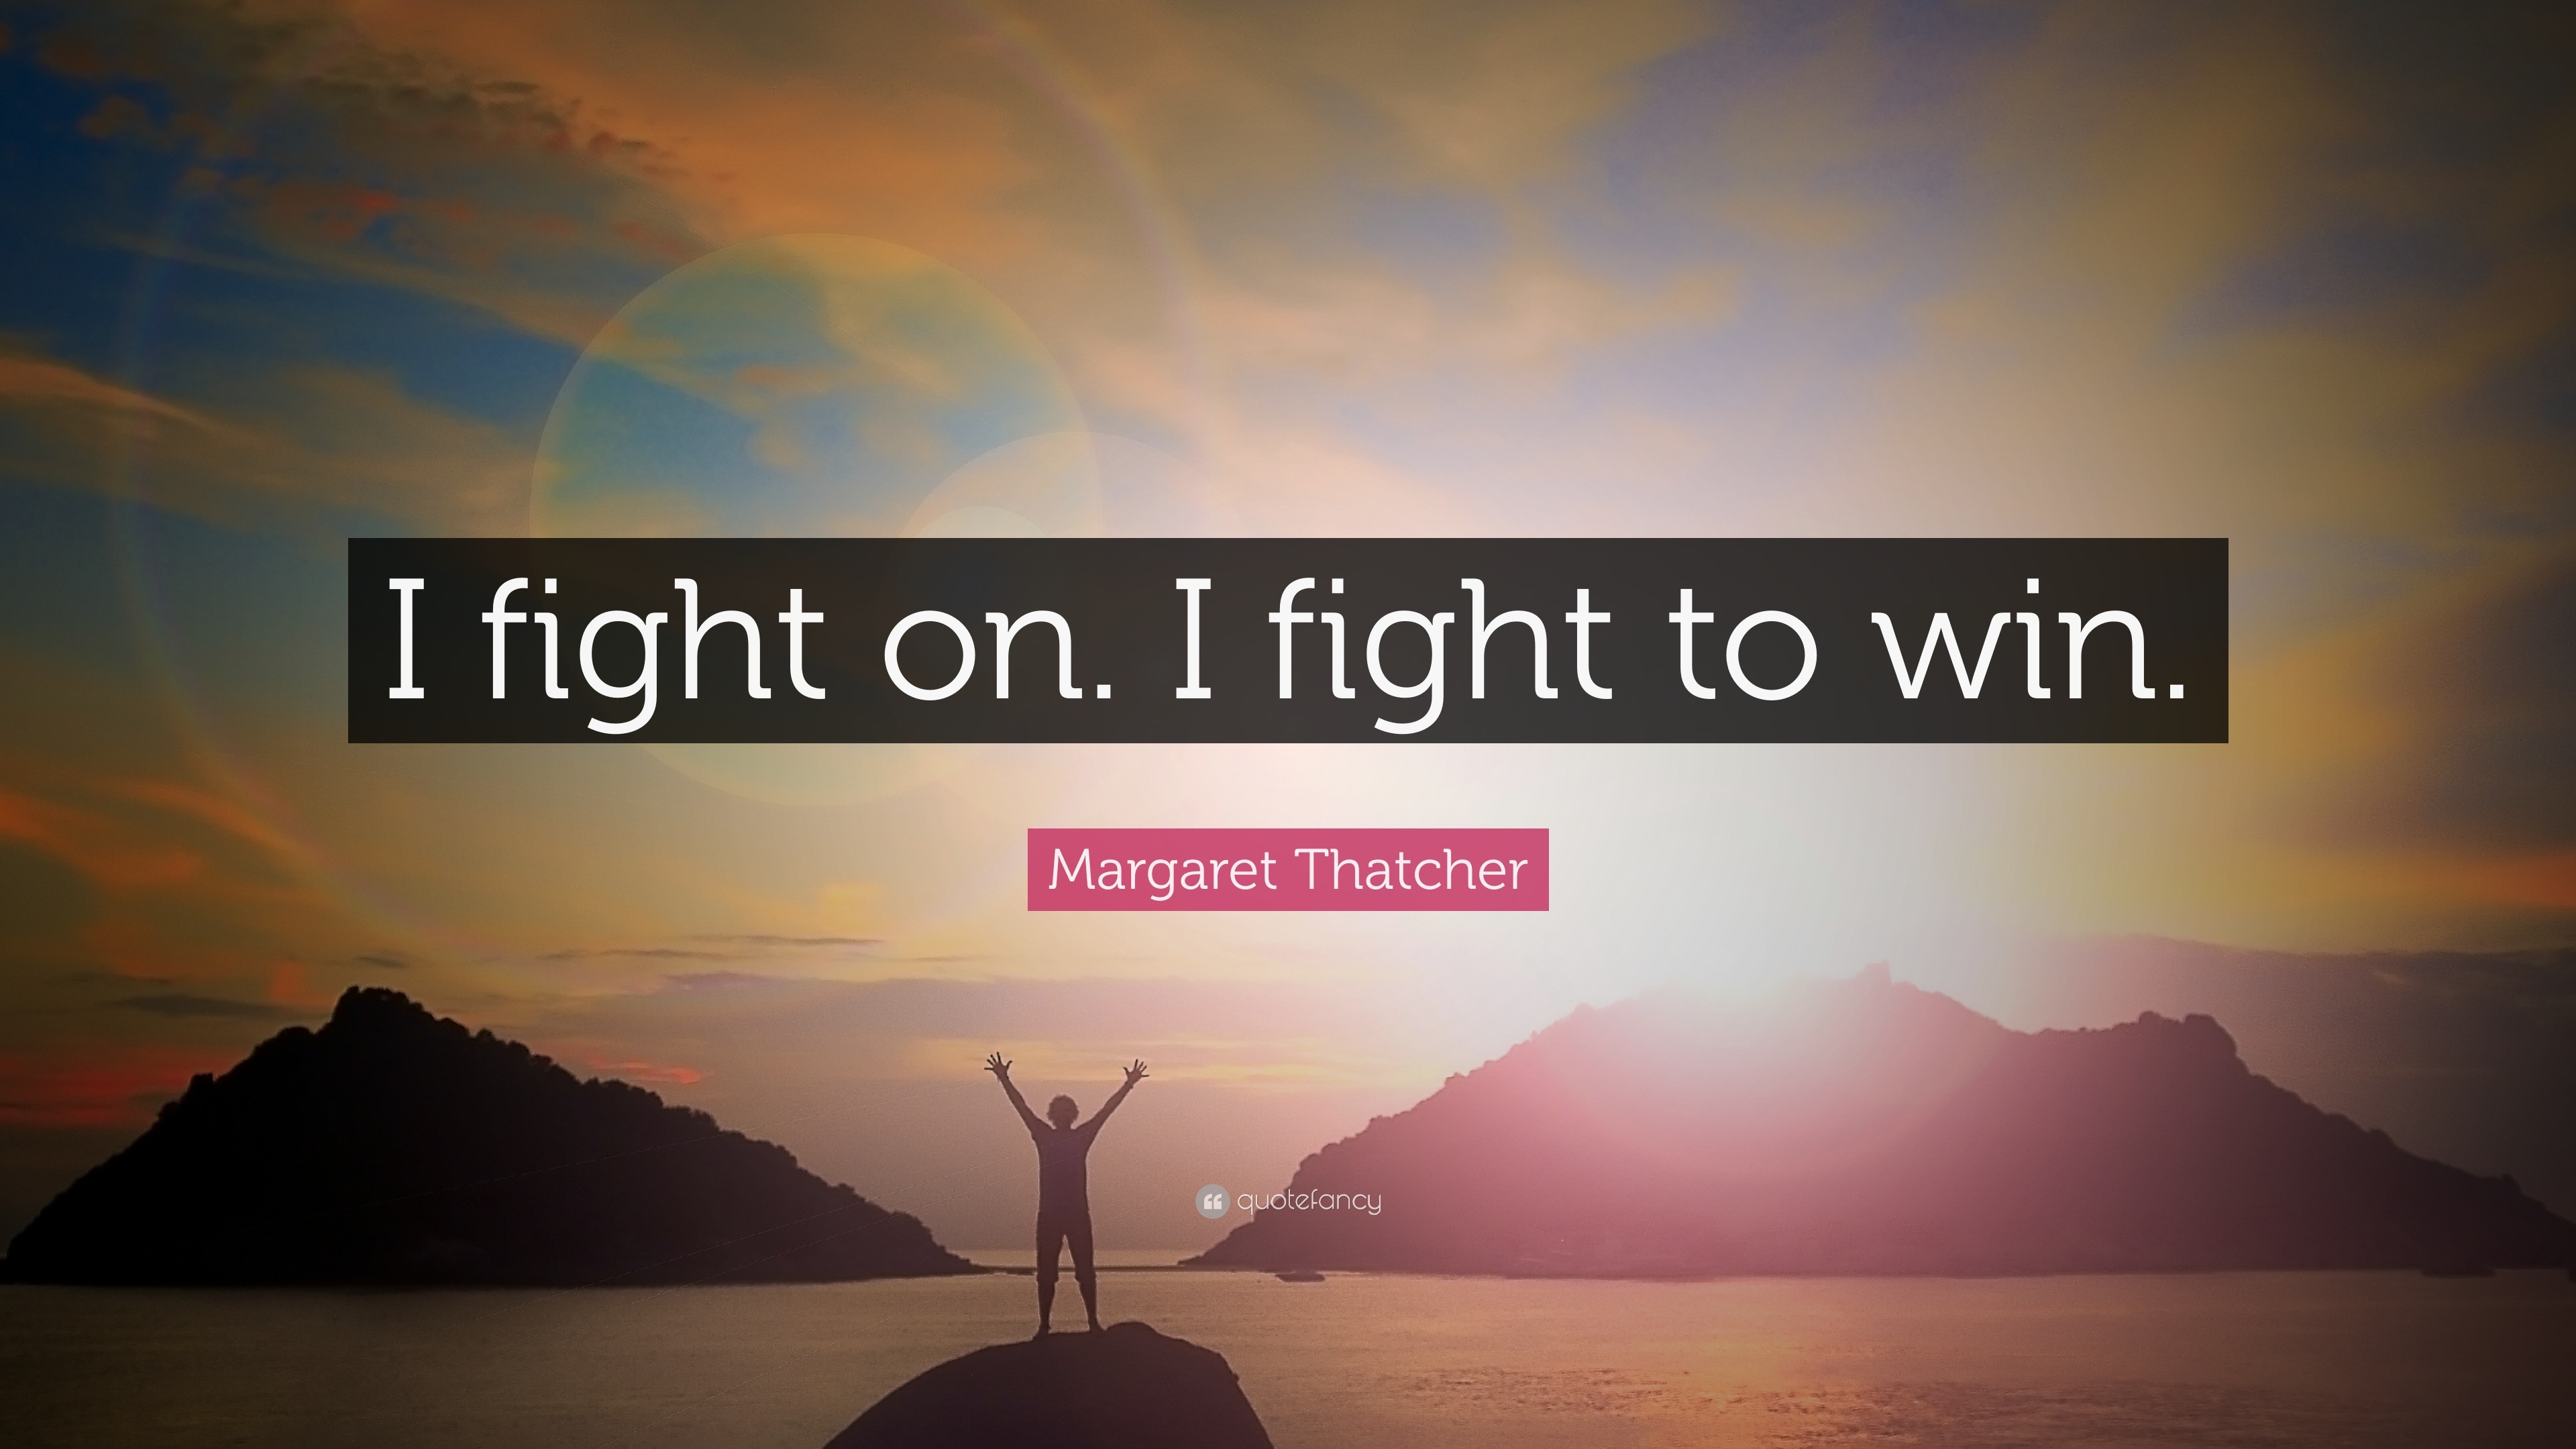 Margaret Thatcher Quote “I fight on. I fight to win.” (12